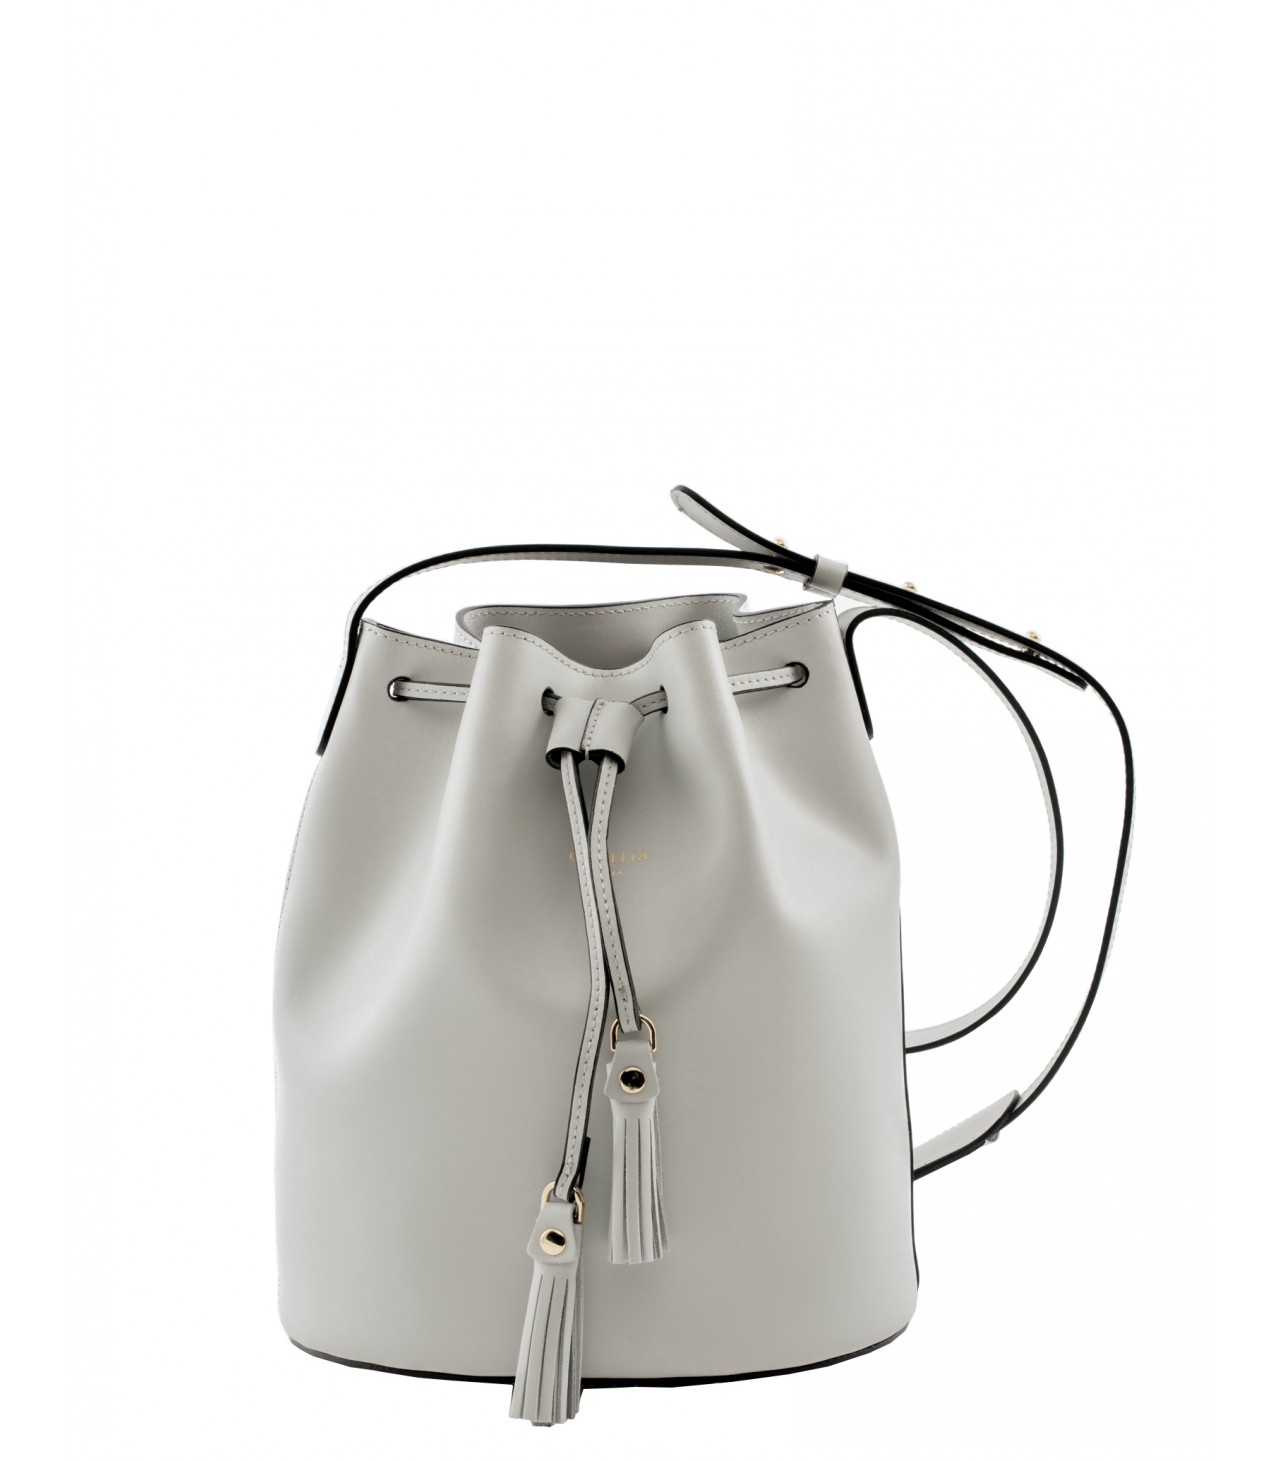 White Leather Bucket Bag Deals, 58% OFF | www.hcb.cat